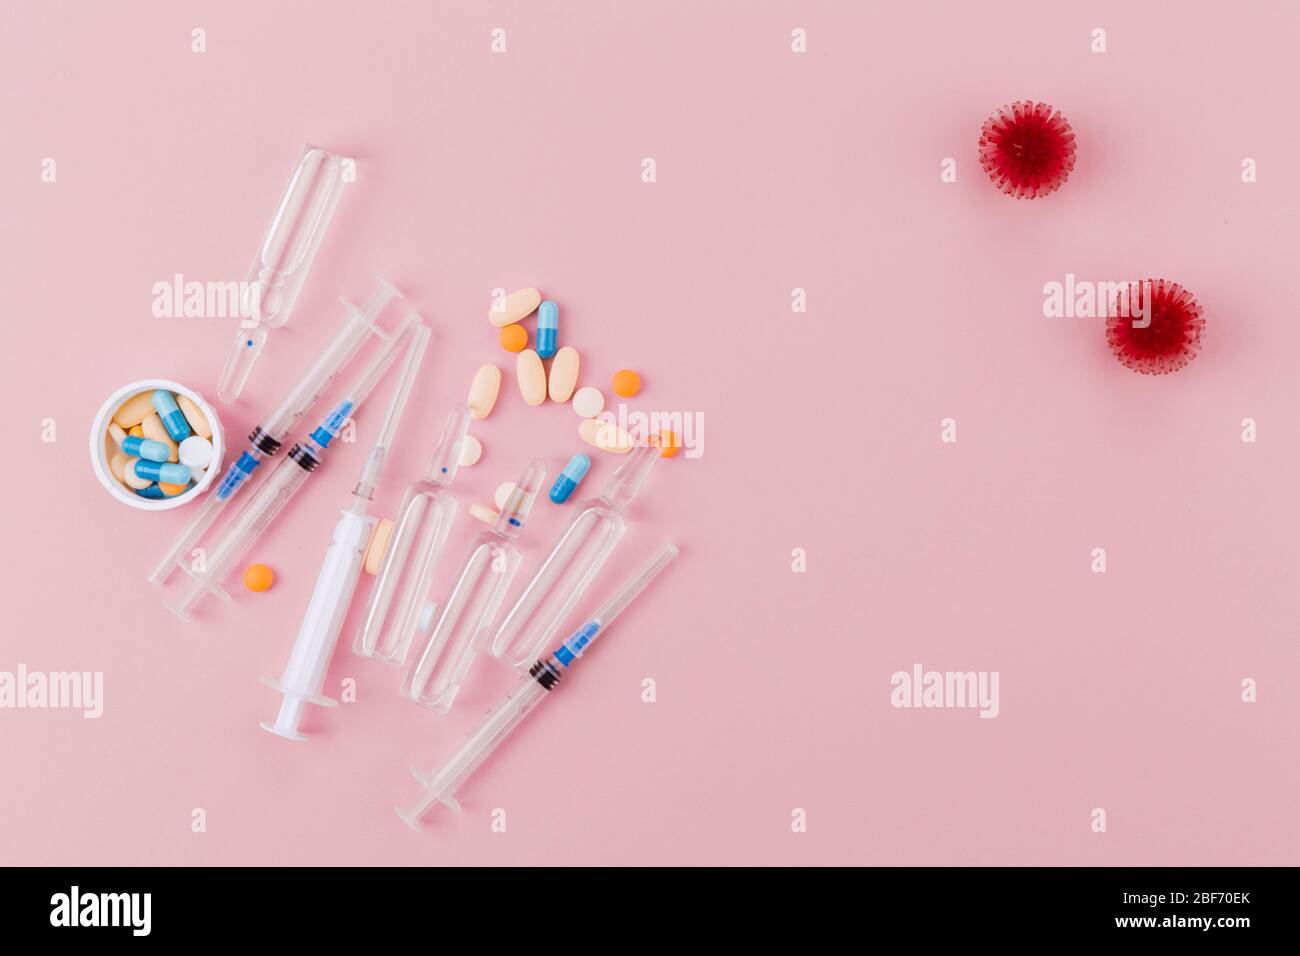 Abstract model of coronavirus infection of the strain Coronavirus. Red virus, syringe and ampoules with medicine, a jar of pills on a pink background, poses a pandemic hazard. Stock Photo